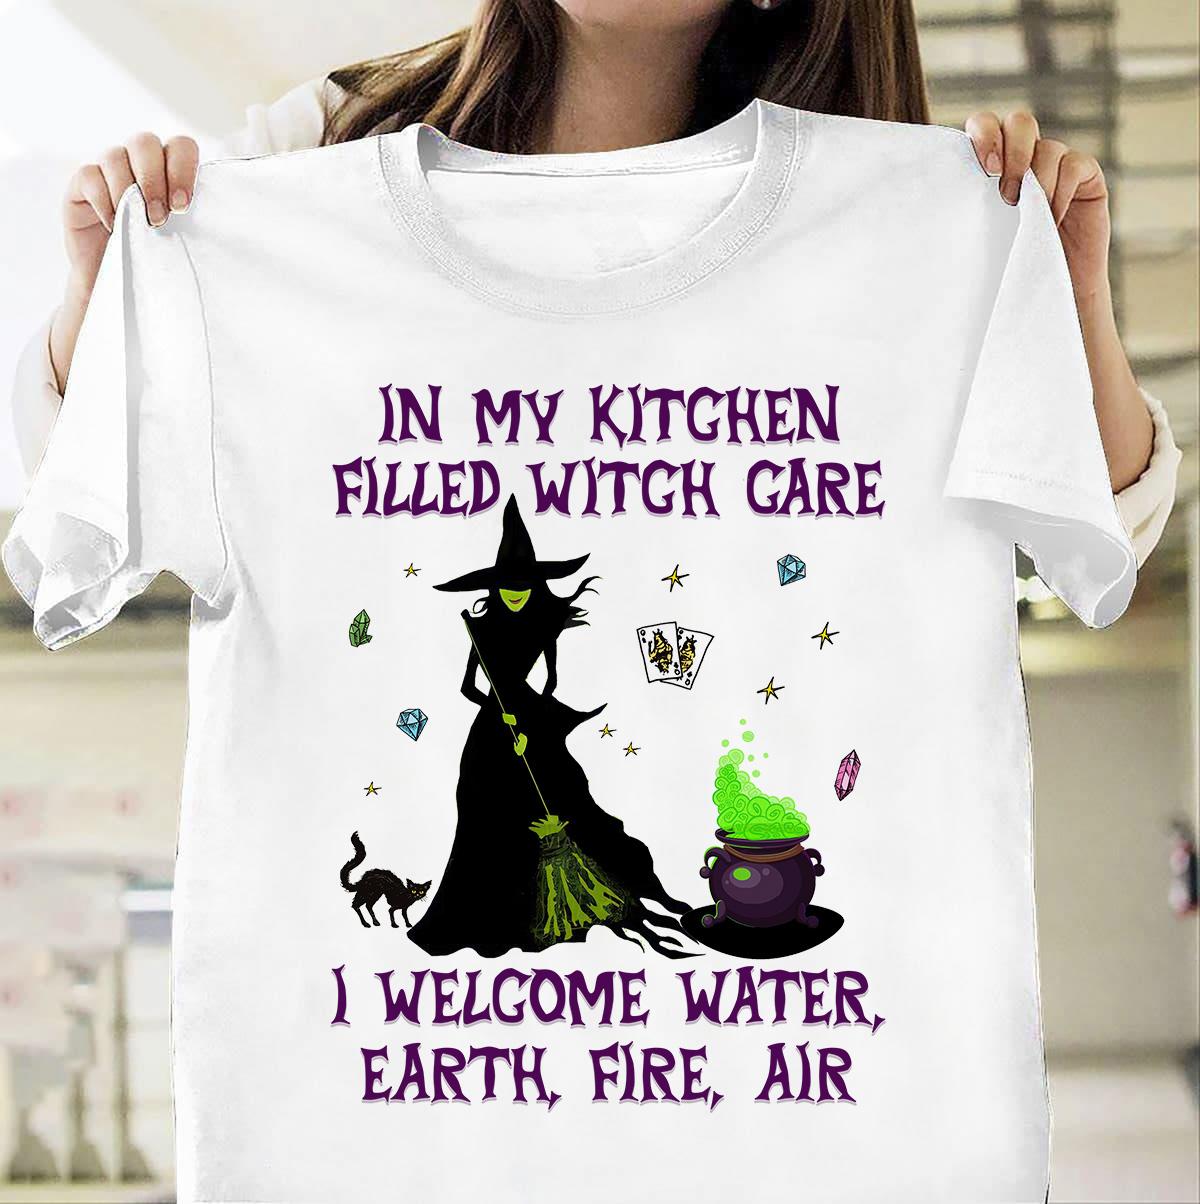 In my kitchen filled with gare I welcome water earth fire air - Halloween witch costume, witch's kitchen